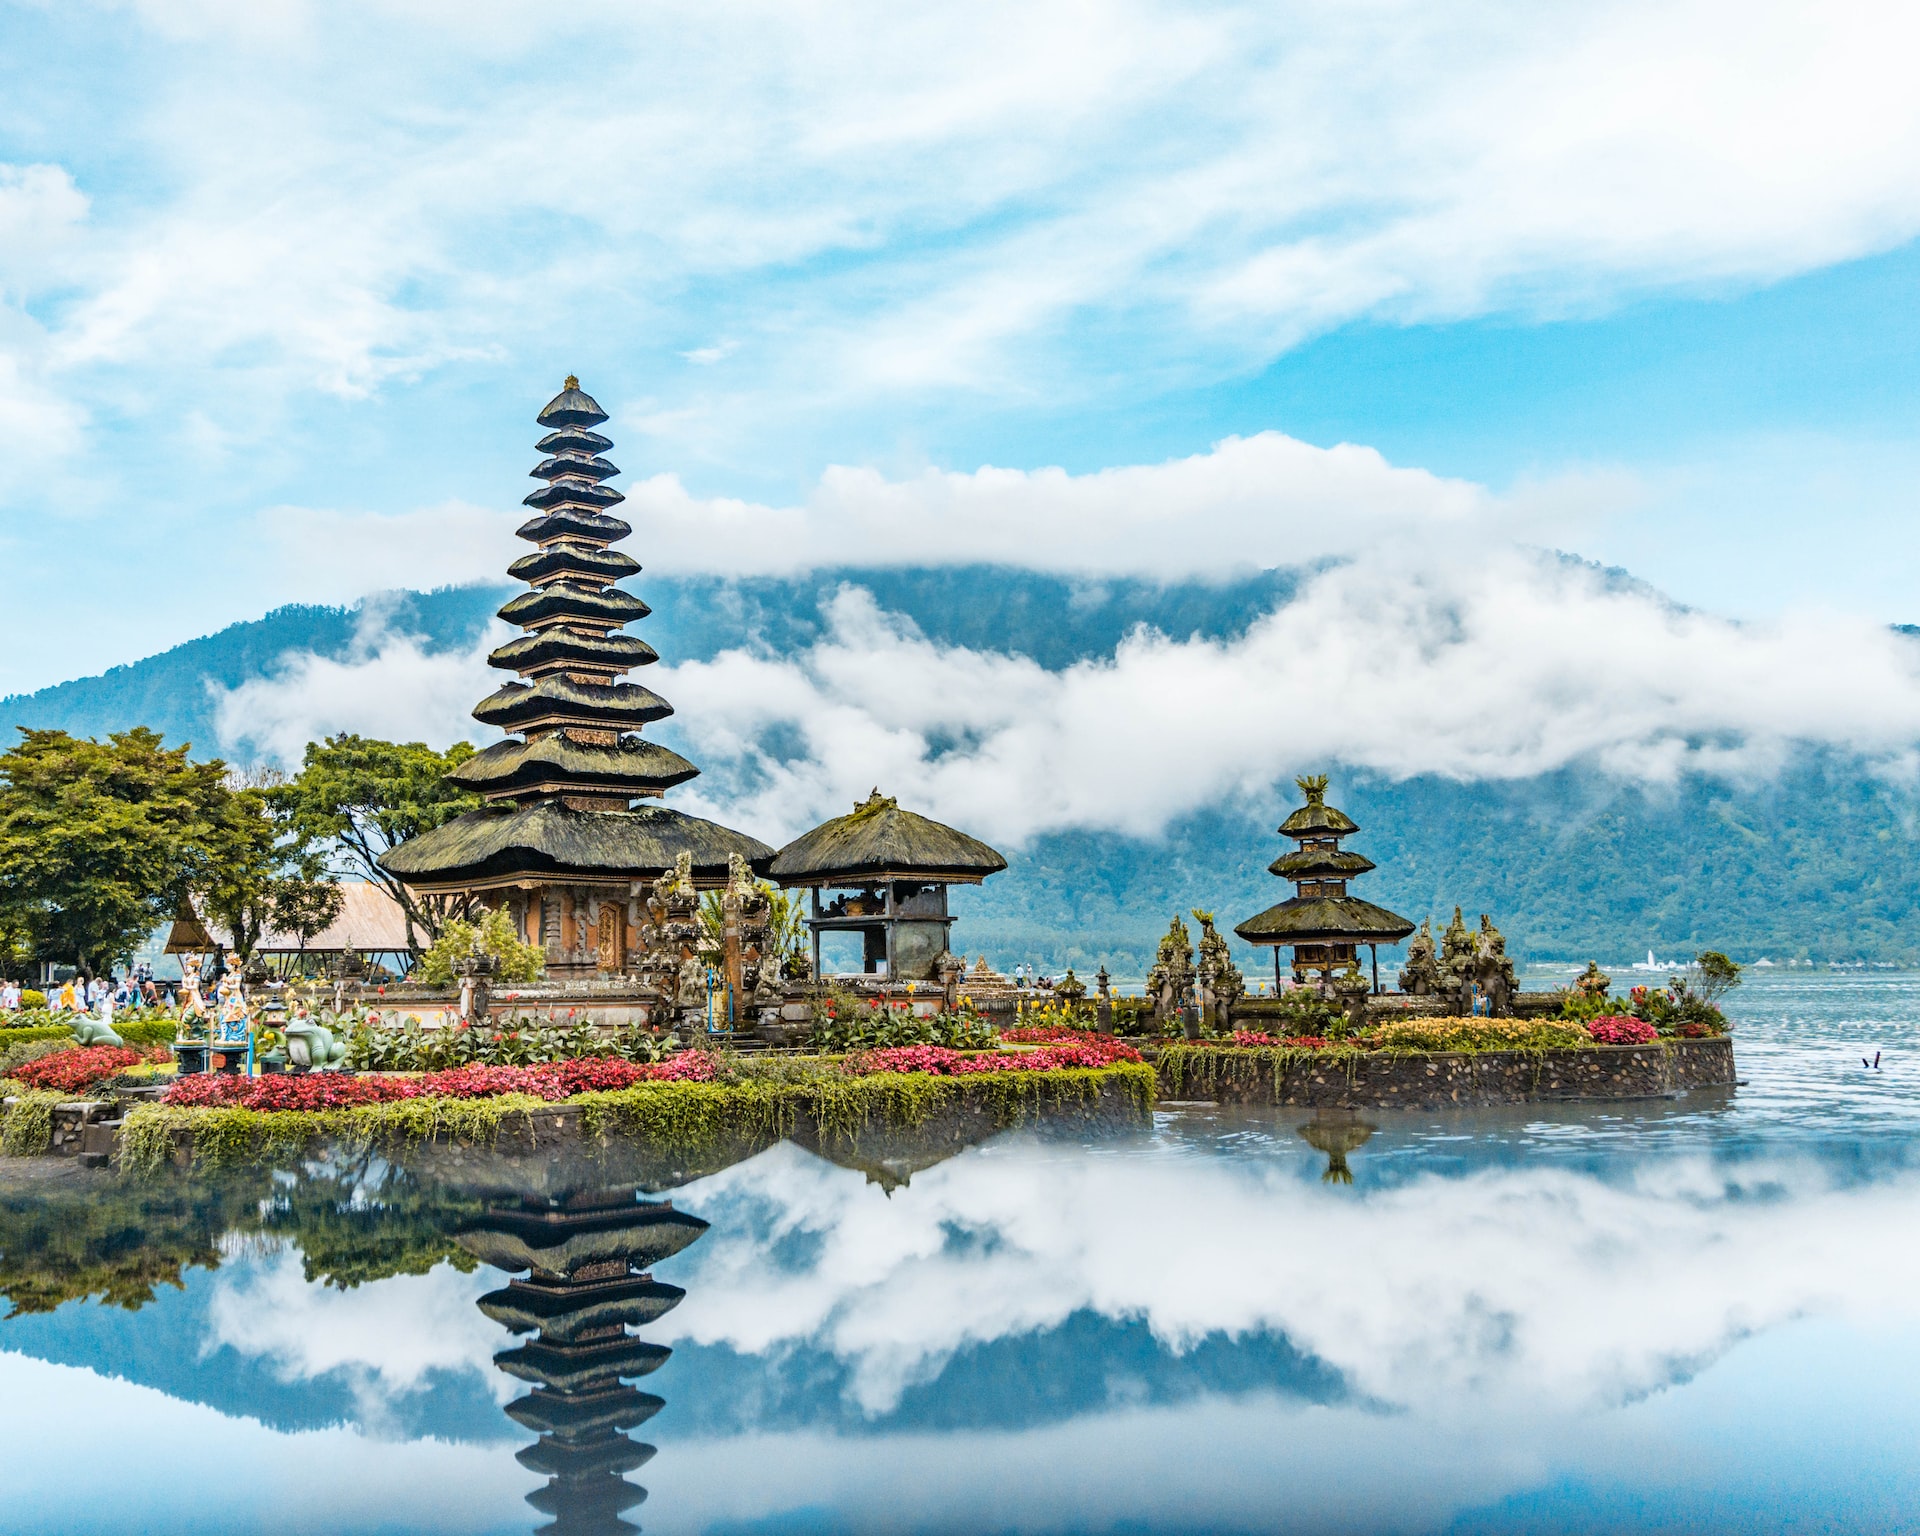 What to see and where to go in Bali?